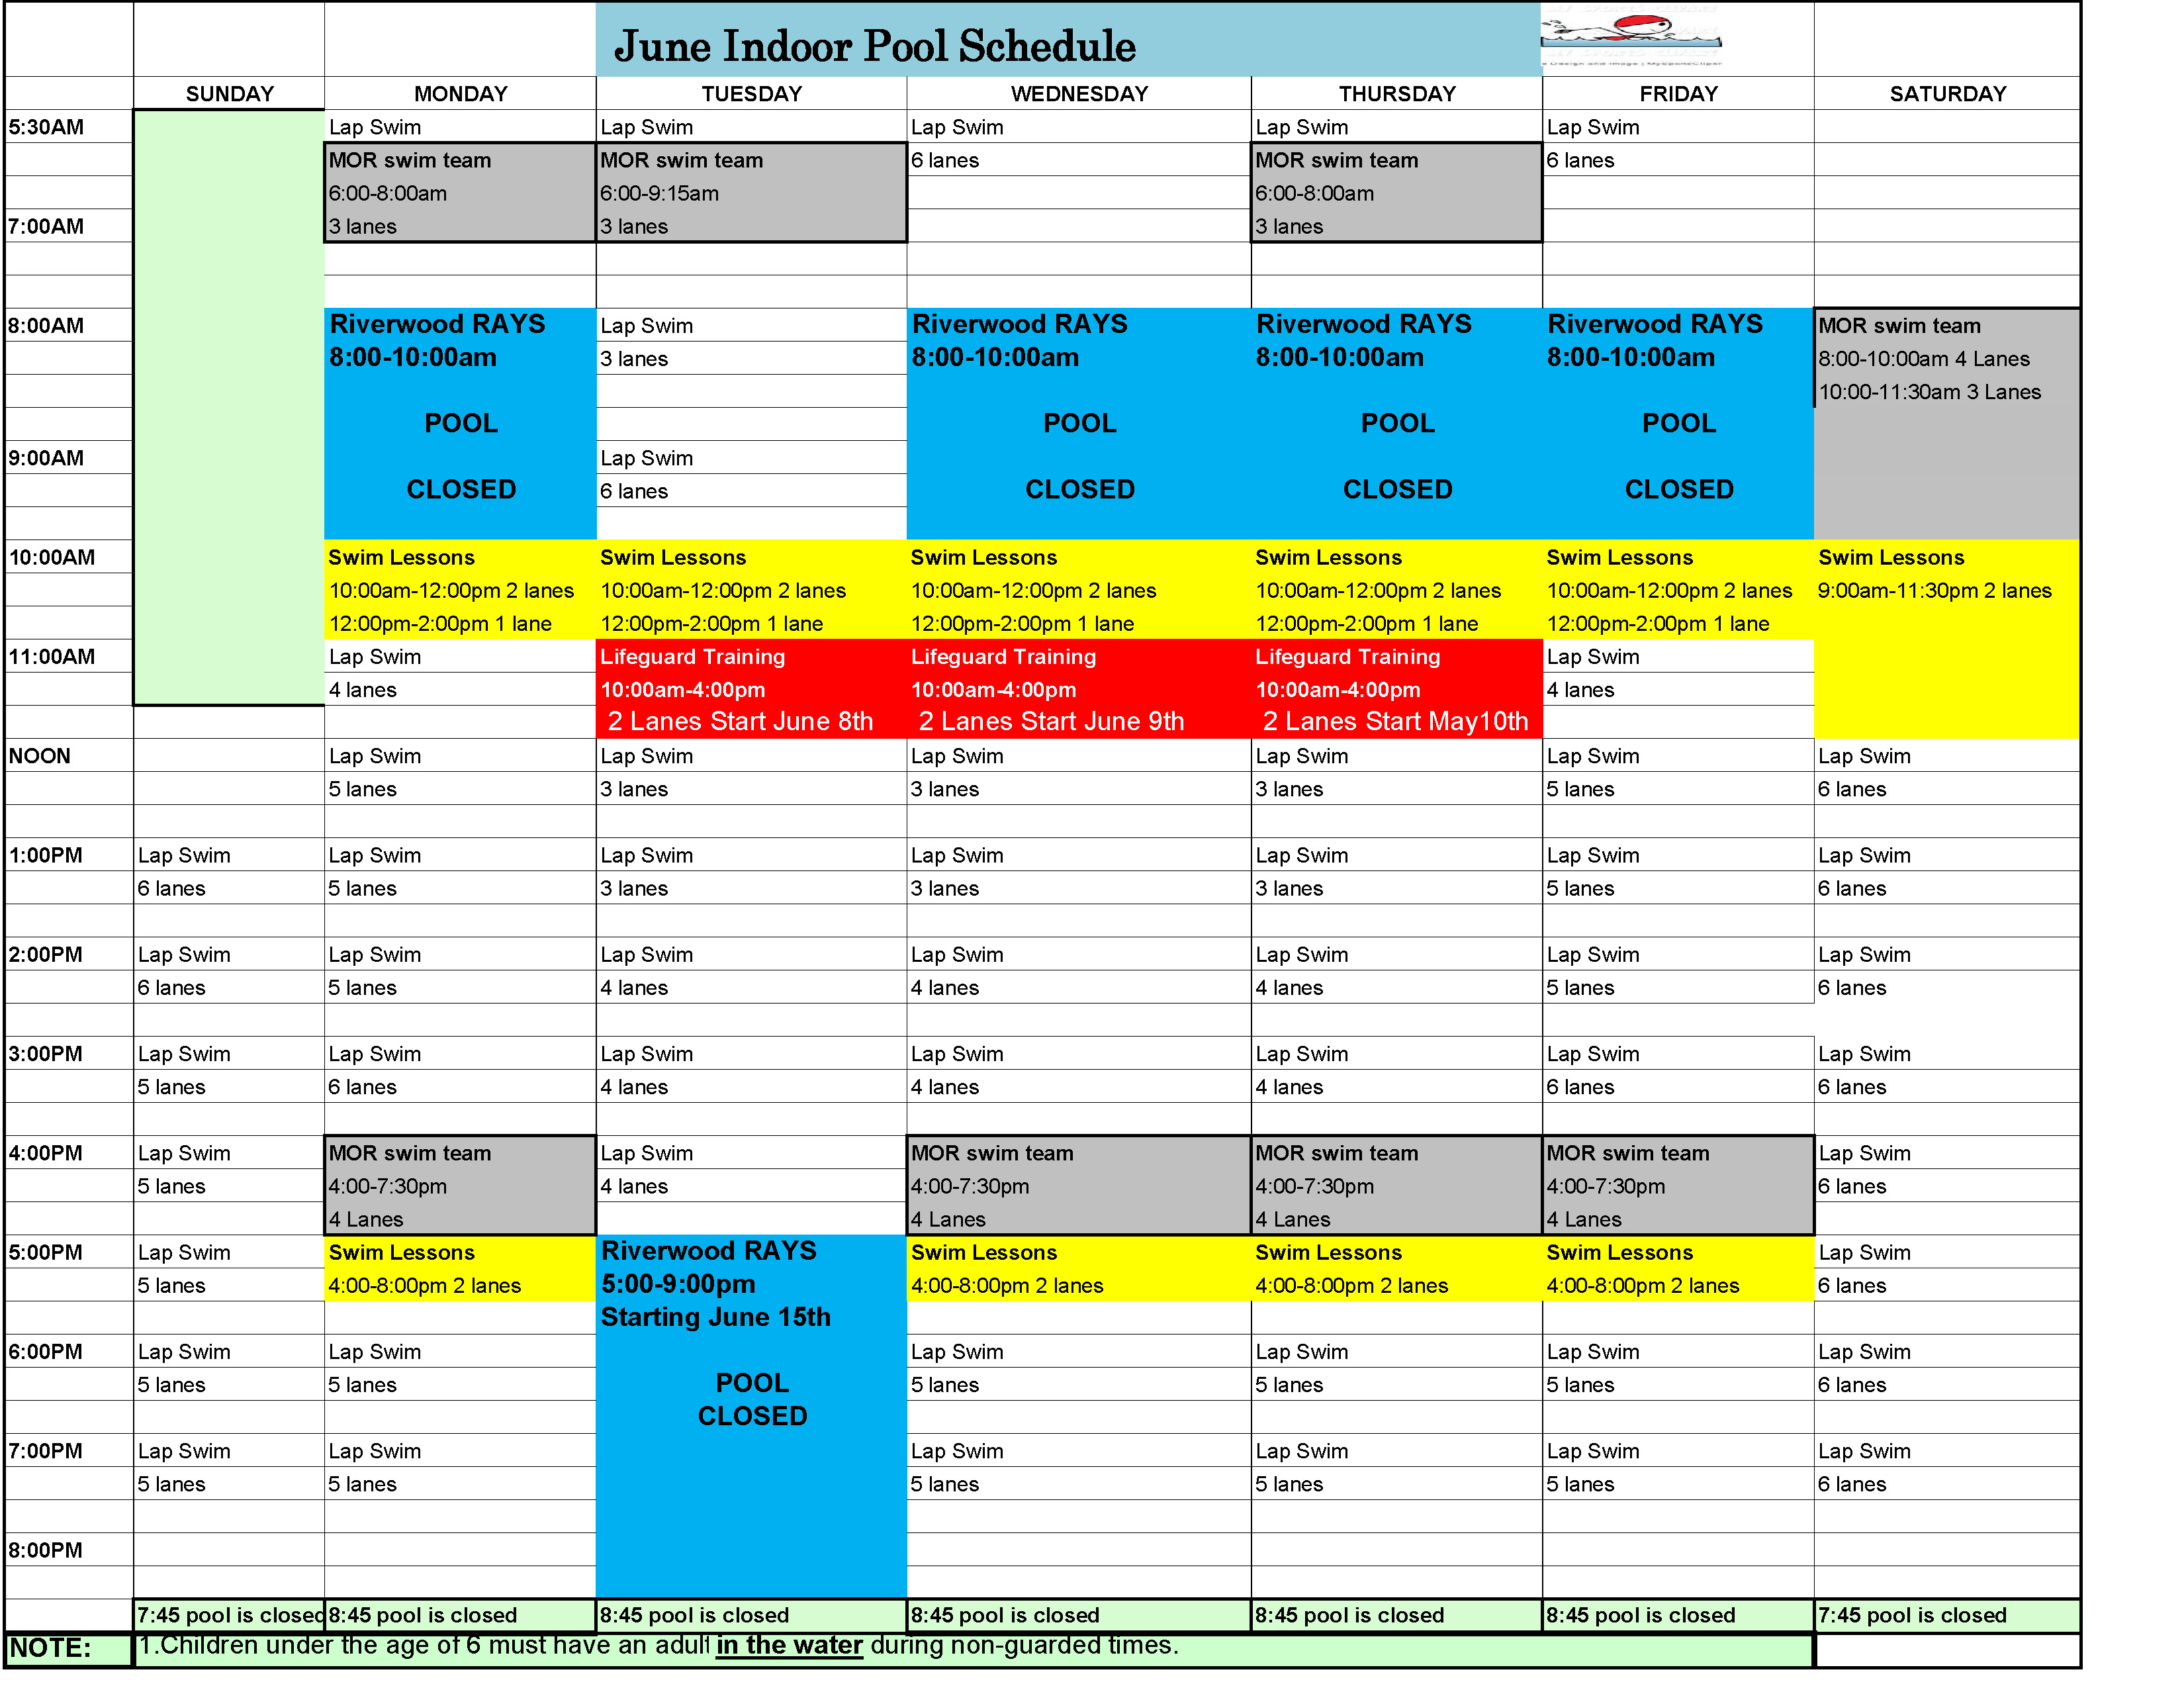 June Aerobics and Indoor Pool Schedules - Fred Smith Company Sports Club